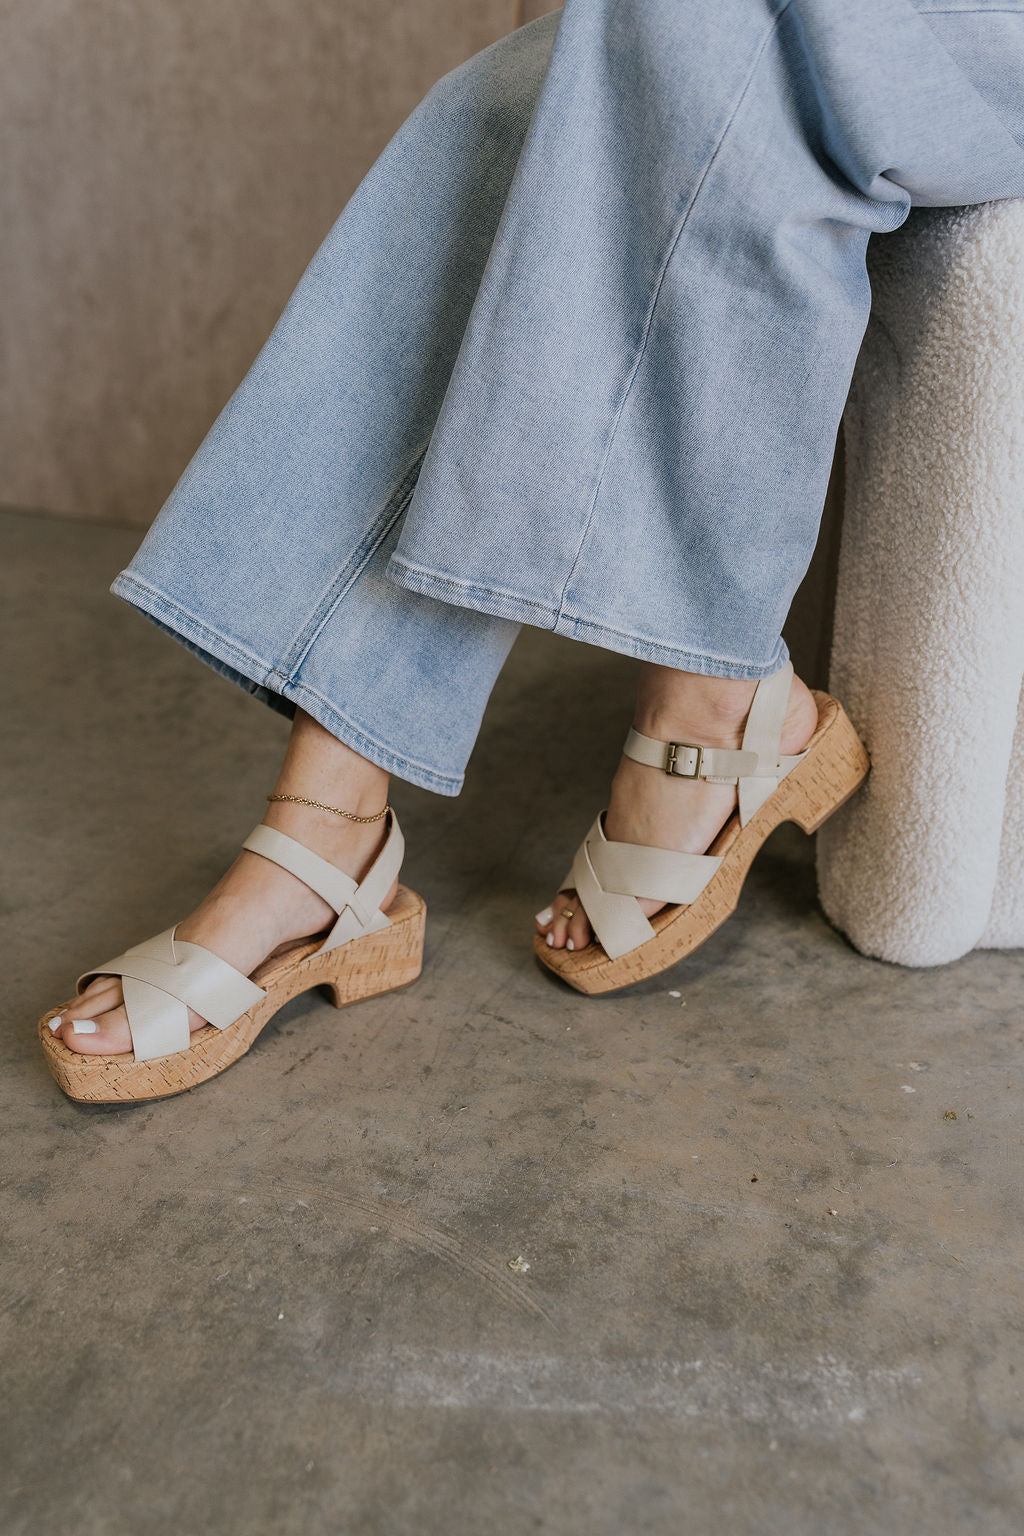 Left side view of female model wearing the Dasha Sandal in Off White which features off white upper leather fabric, kork platform sole, block heel, criss-cross strap and gold adjustable buckle closure